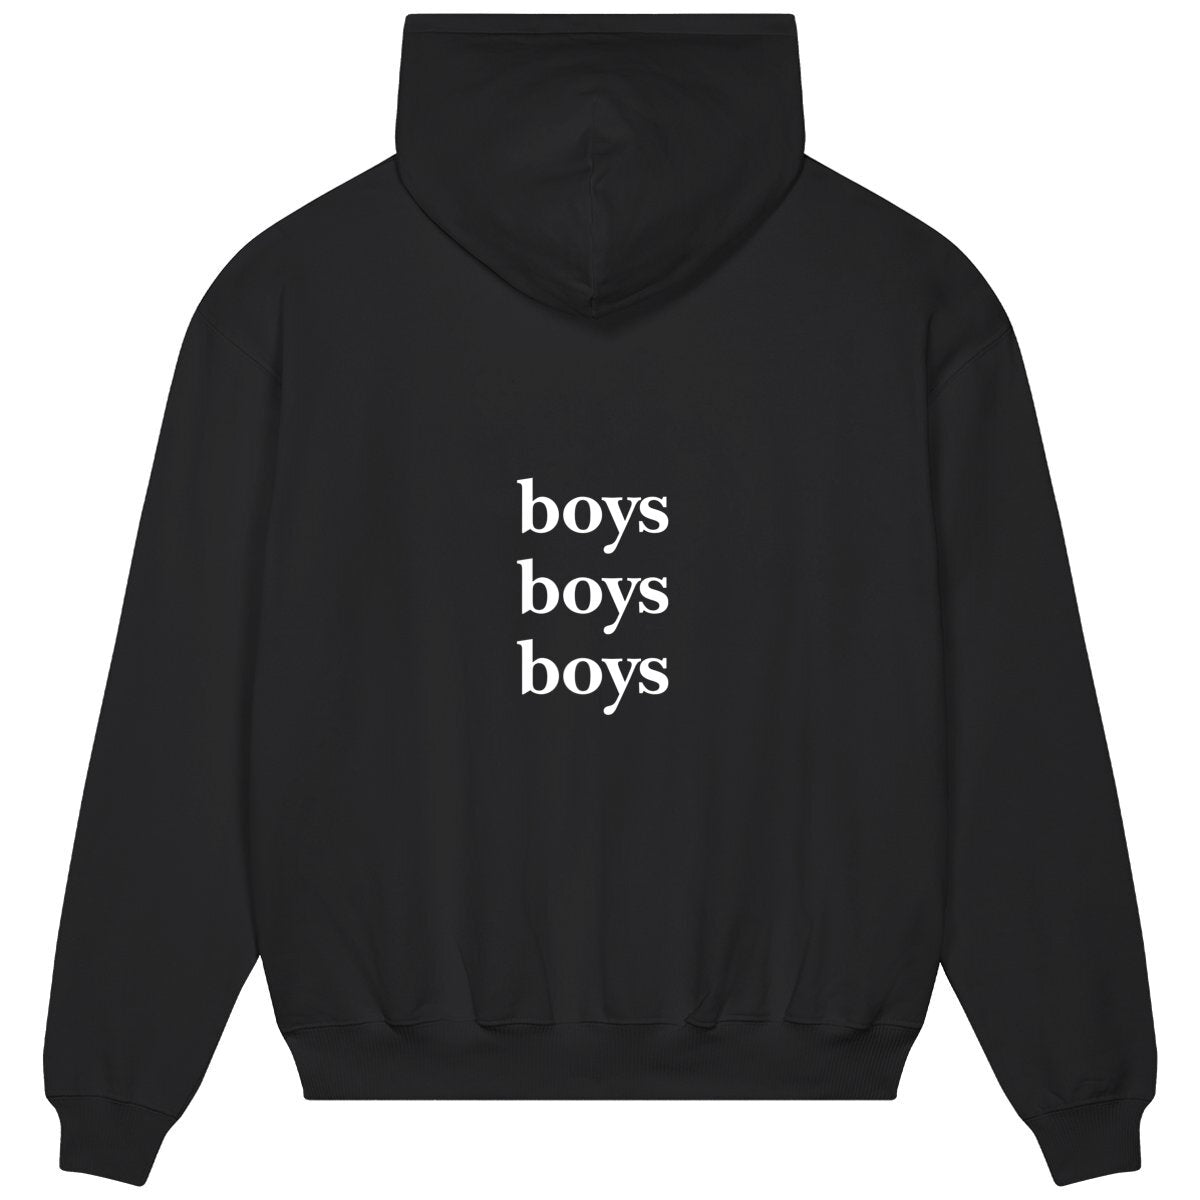 BOYS BOYS BOYS hoodie oversized. garçon garçon essentiel oversized hoodie. Sleek in black and whispering Parisian chic, this hoodie is the sartorial whisper of 'garçon garçon' — a statement of understated elegance. Perfect for those who carry a piece of Paris in their hearts and a touch of audacity on their sleeves.